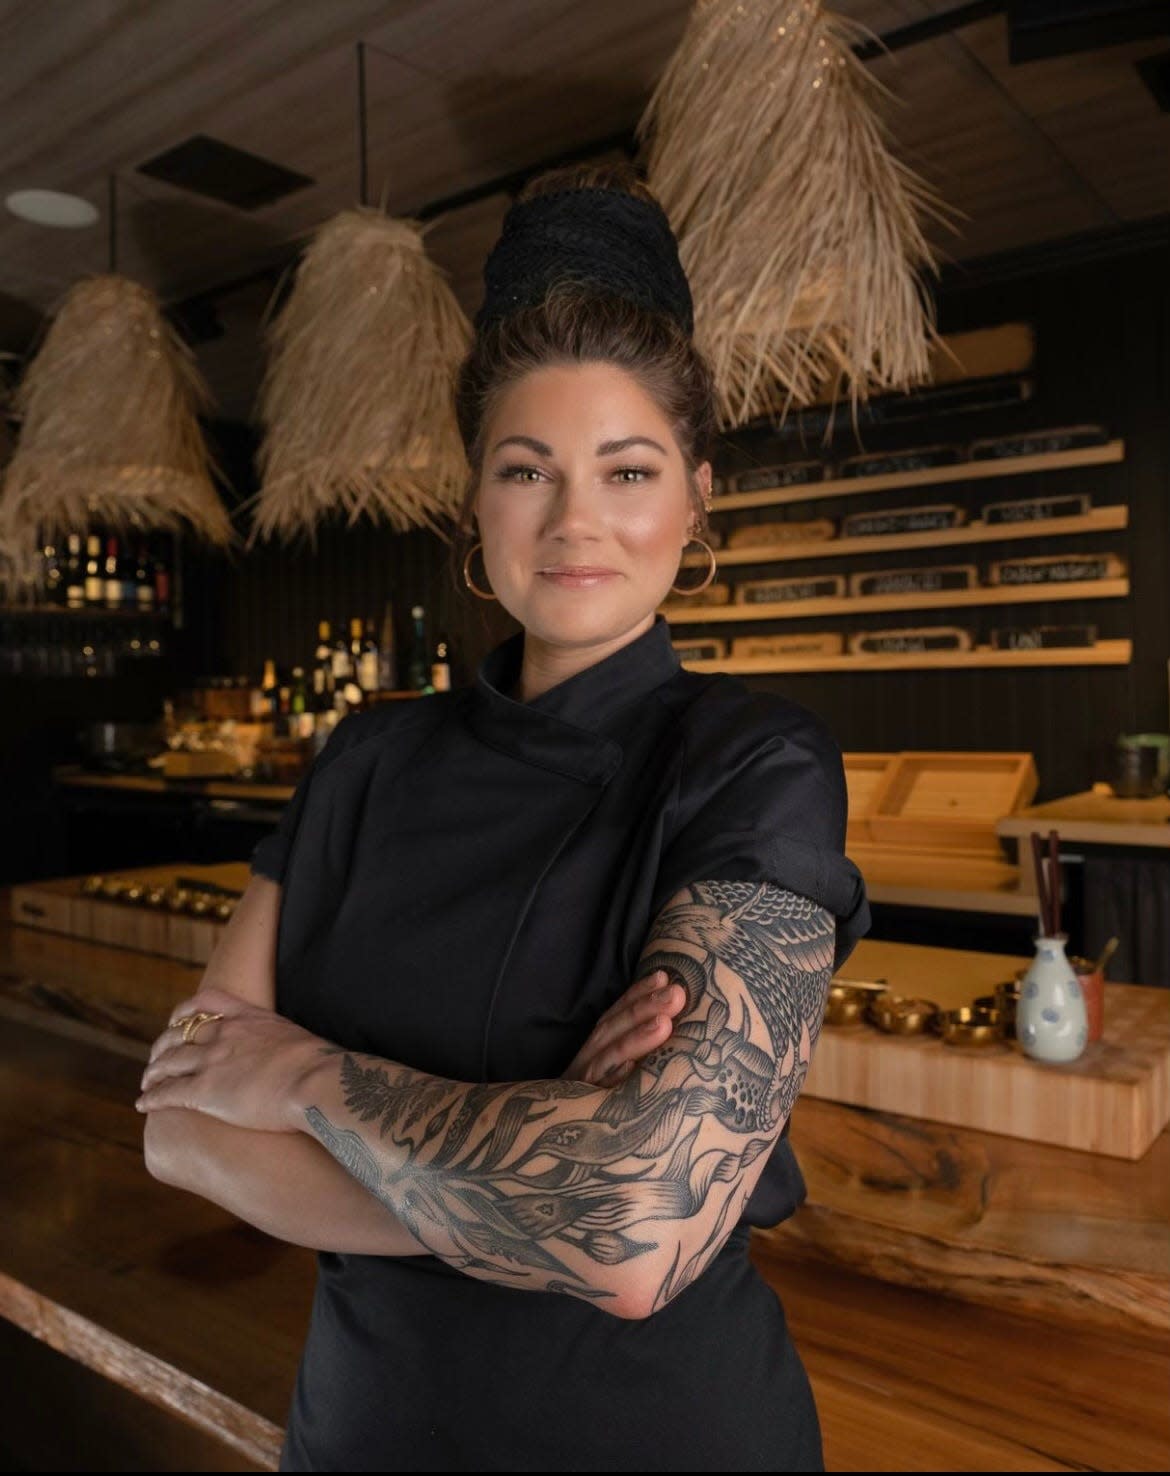 Chef Ambrely Ouimette has left Sushi | Bar to open her own sushi restaurant in Austin.